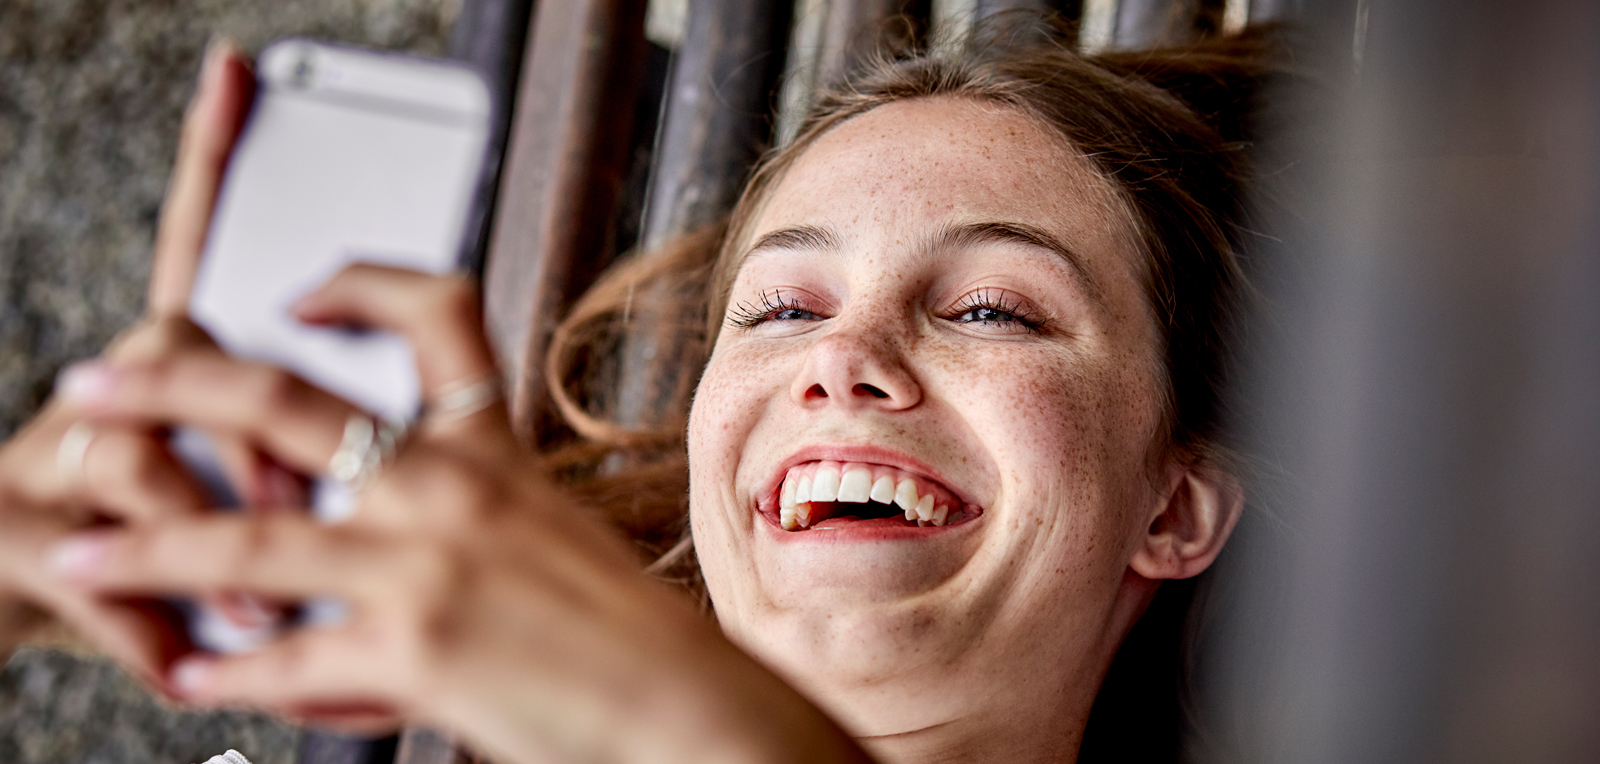 Woman laughing while looking at her mobile phone